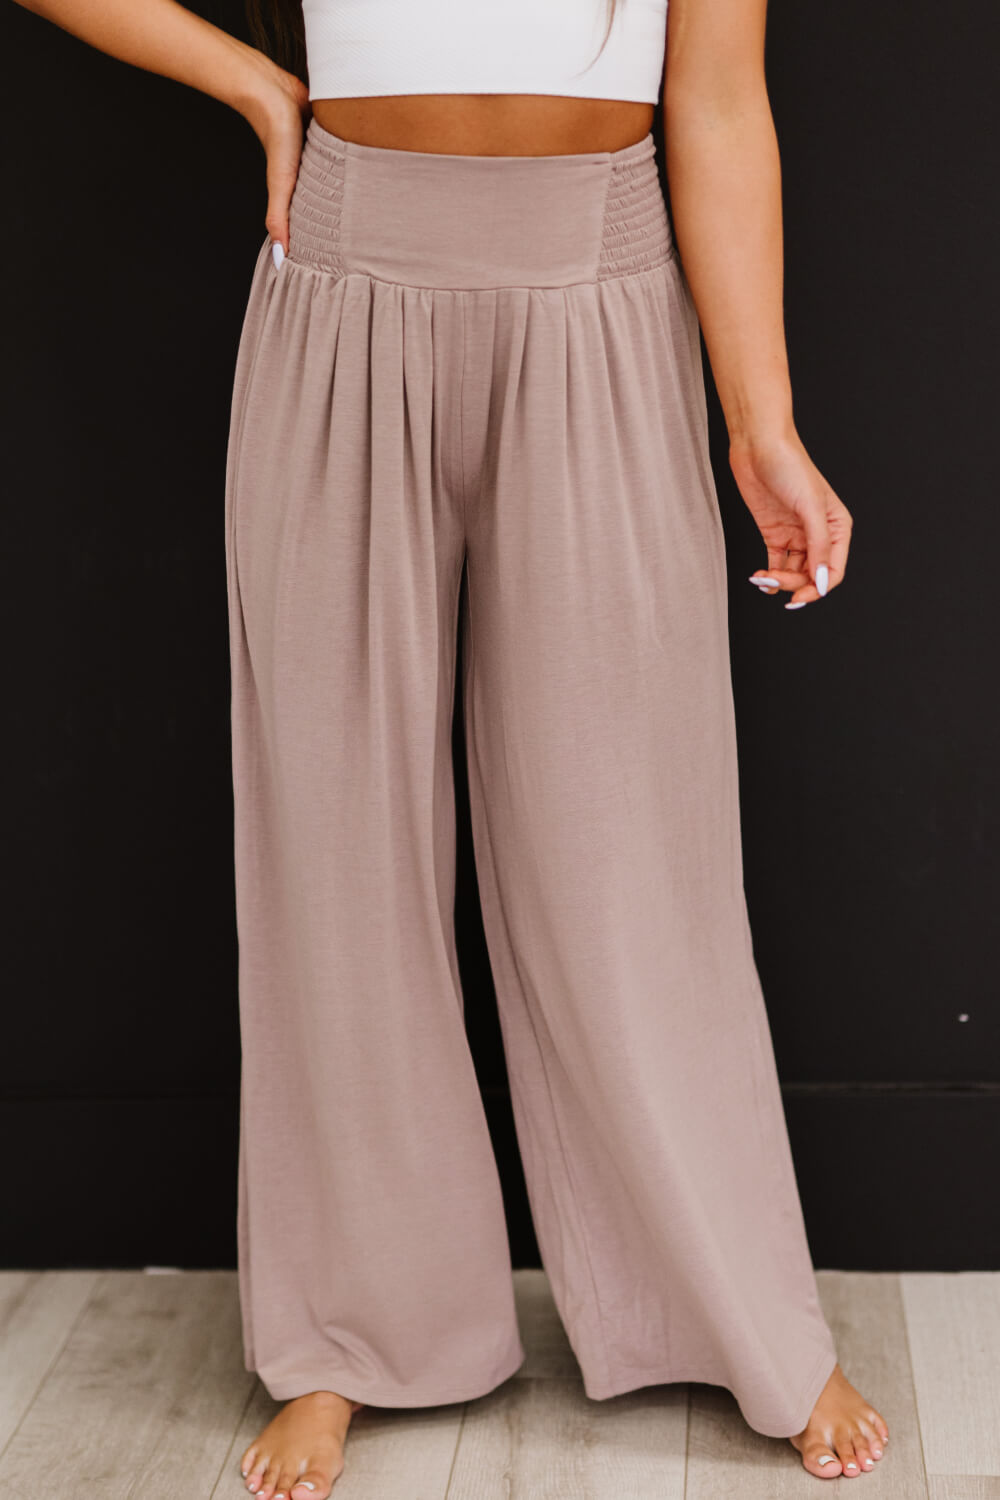 Zenana Easy Breezy Full Size Run Palazzo Pants - What's Your Chic